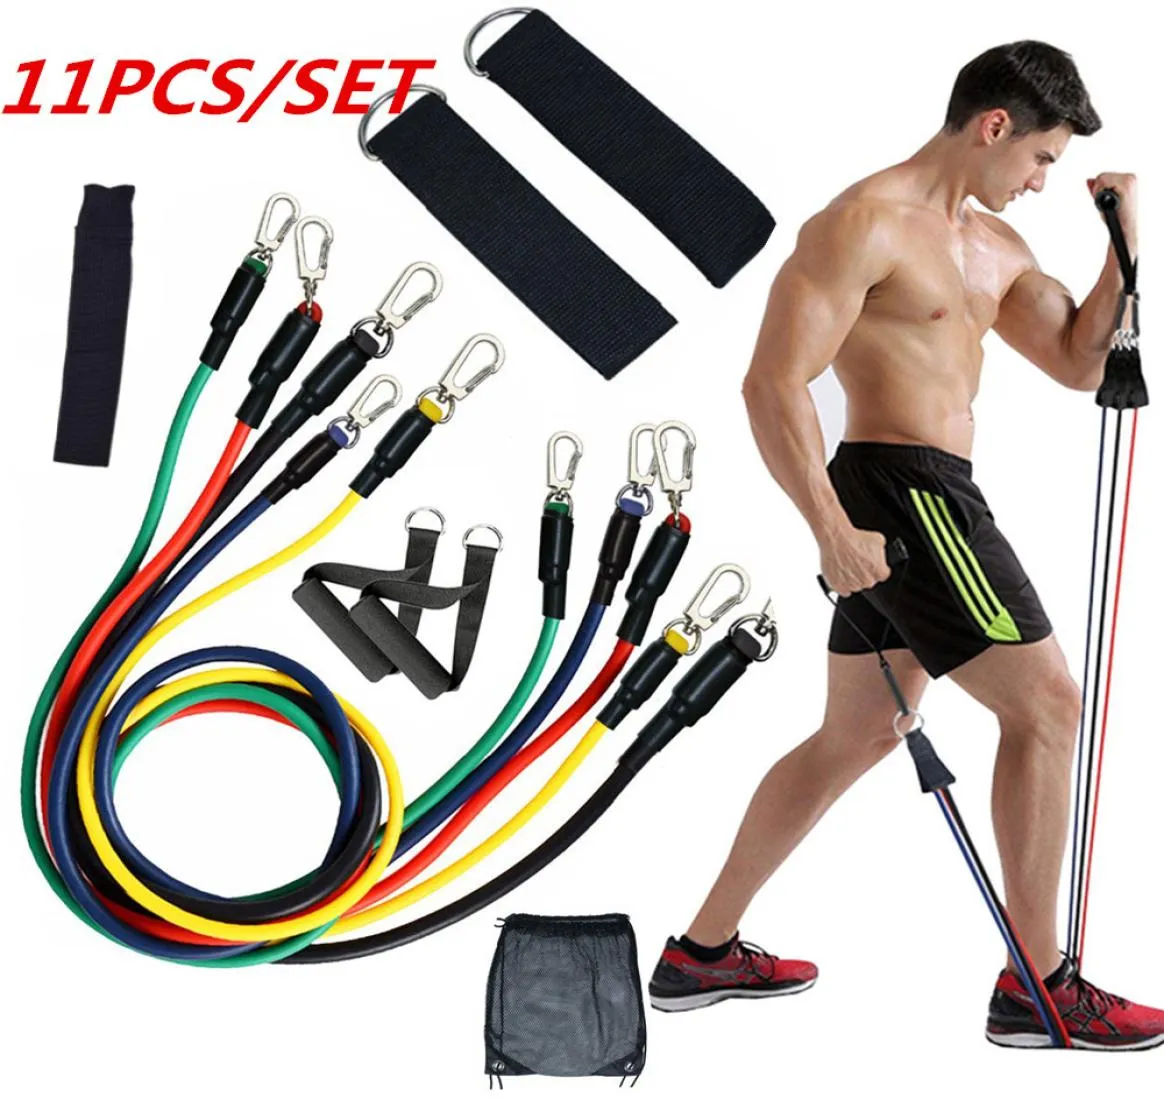 11pcsset Exercises Resistance Bands Latex Tubes Pedal Excerciser Body Home Gym Fitness Training Workout Yoga Elastic Pull Rope Eq4706338